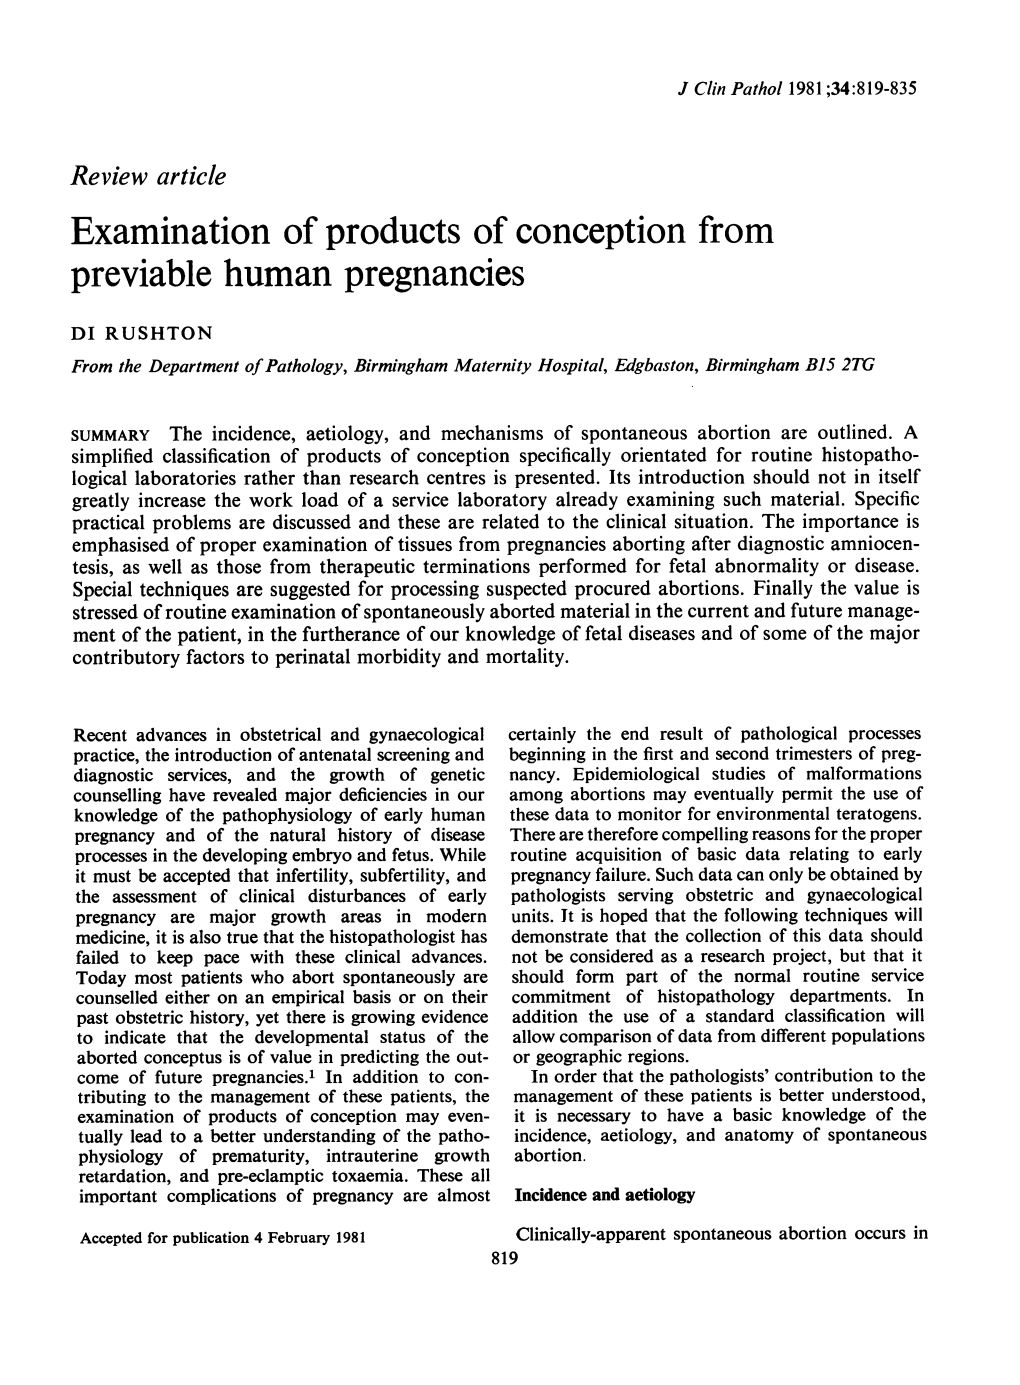 Examination of Products of Conception from Previable Human Pregnancies